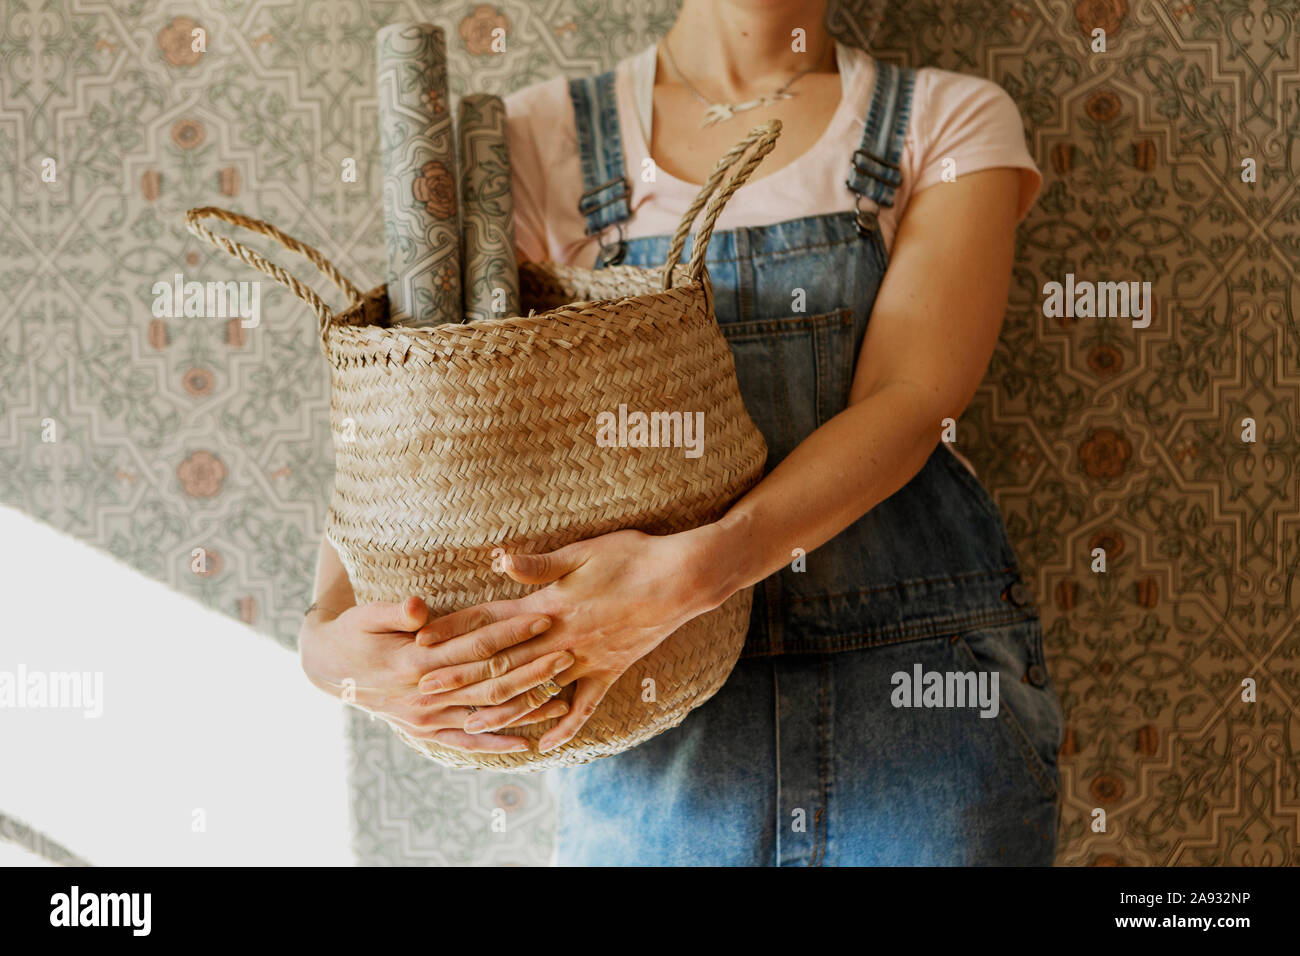 Woman holding basket with wallpaper rolls Stock Photo